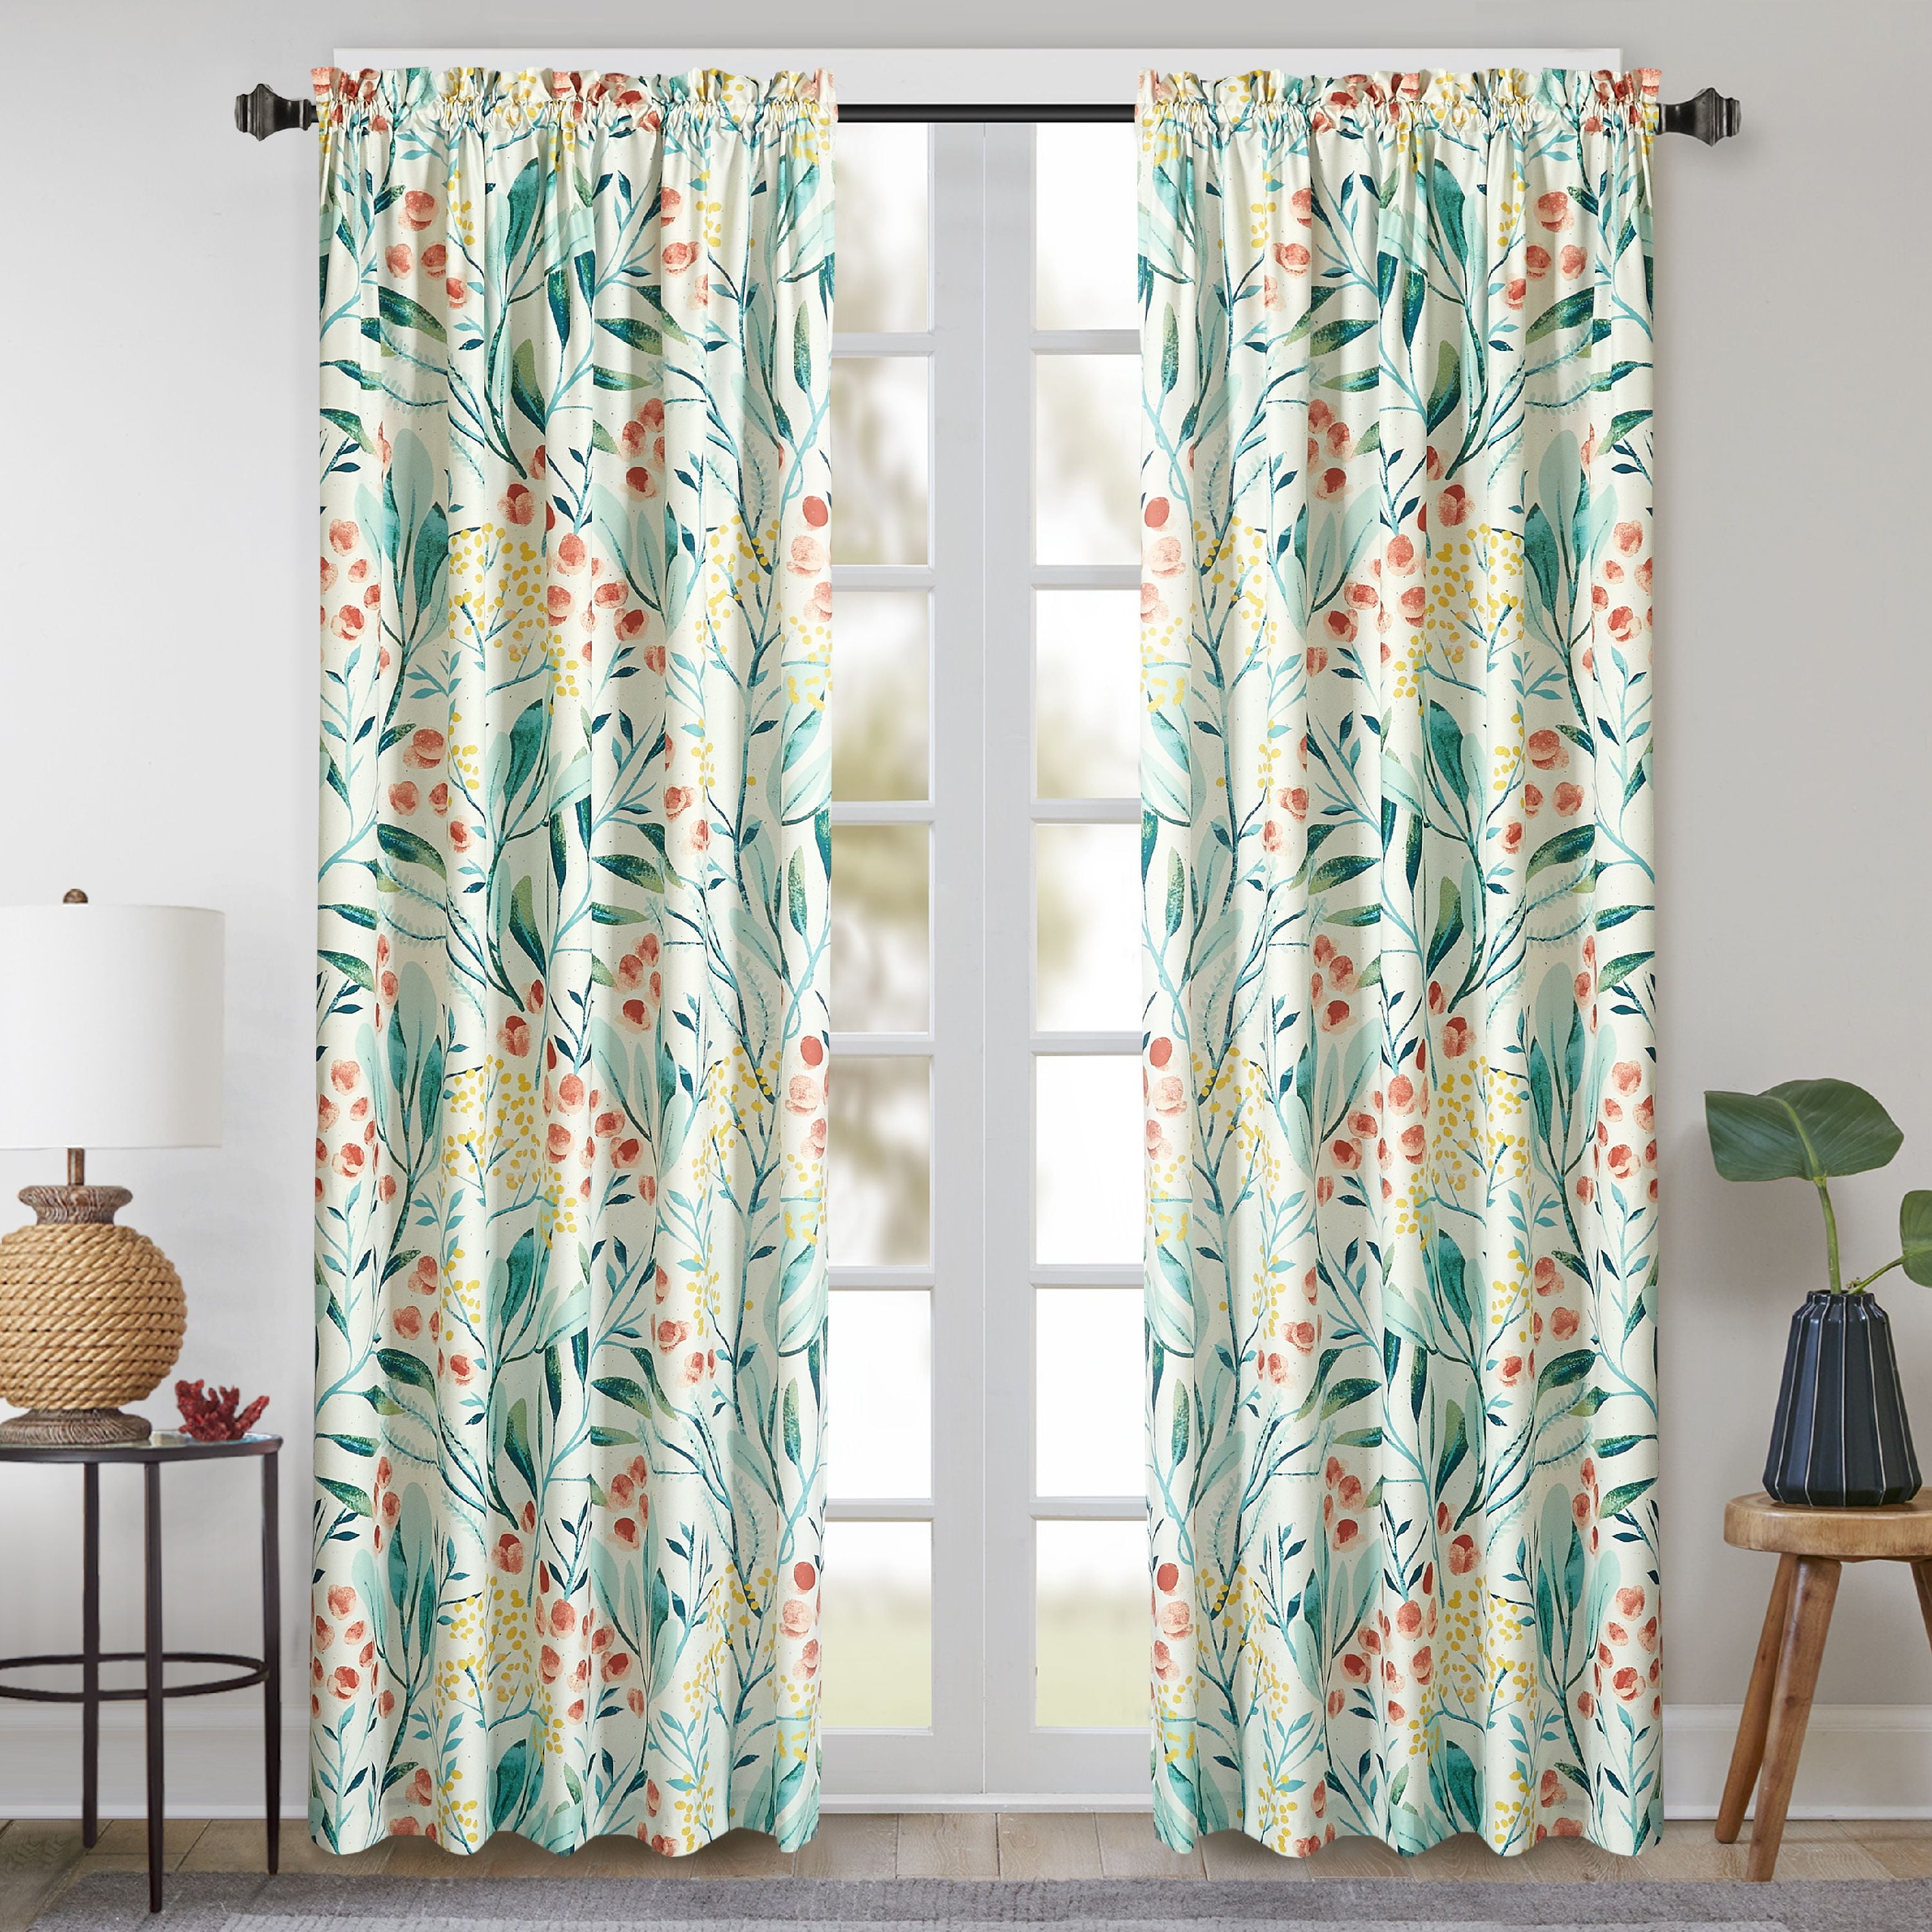 Sunclipse Modern Floral Bybery Curtain Panel, set of 2 - Walmart.com